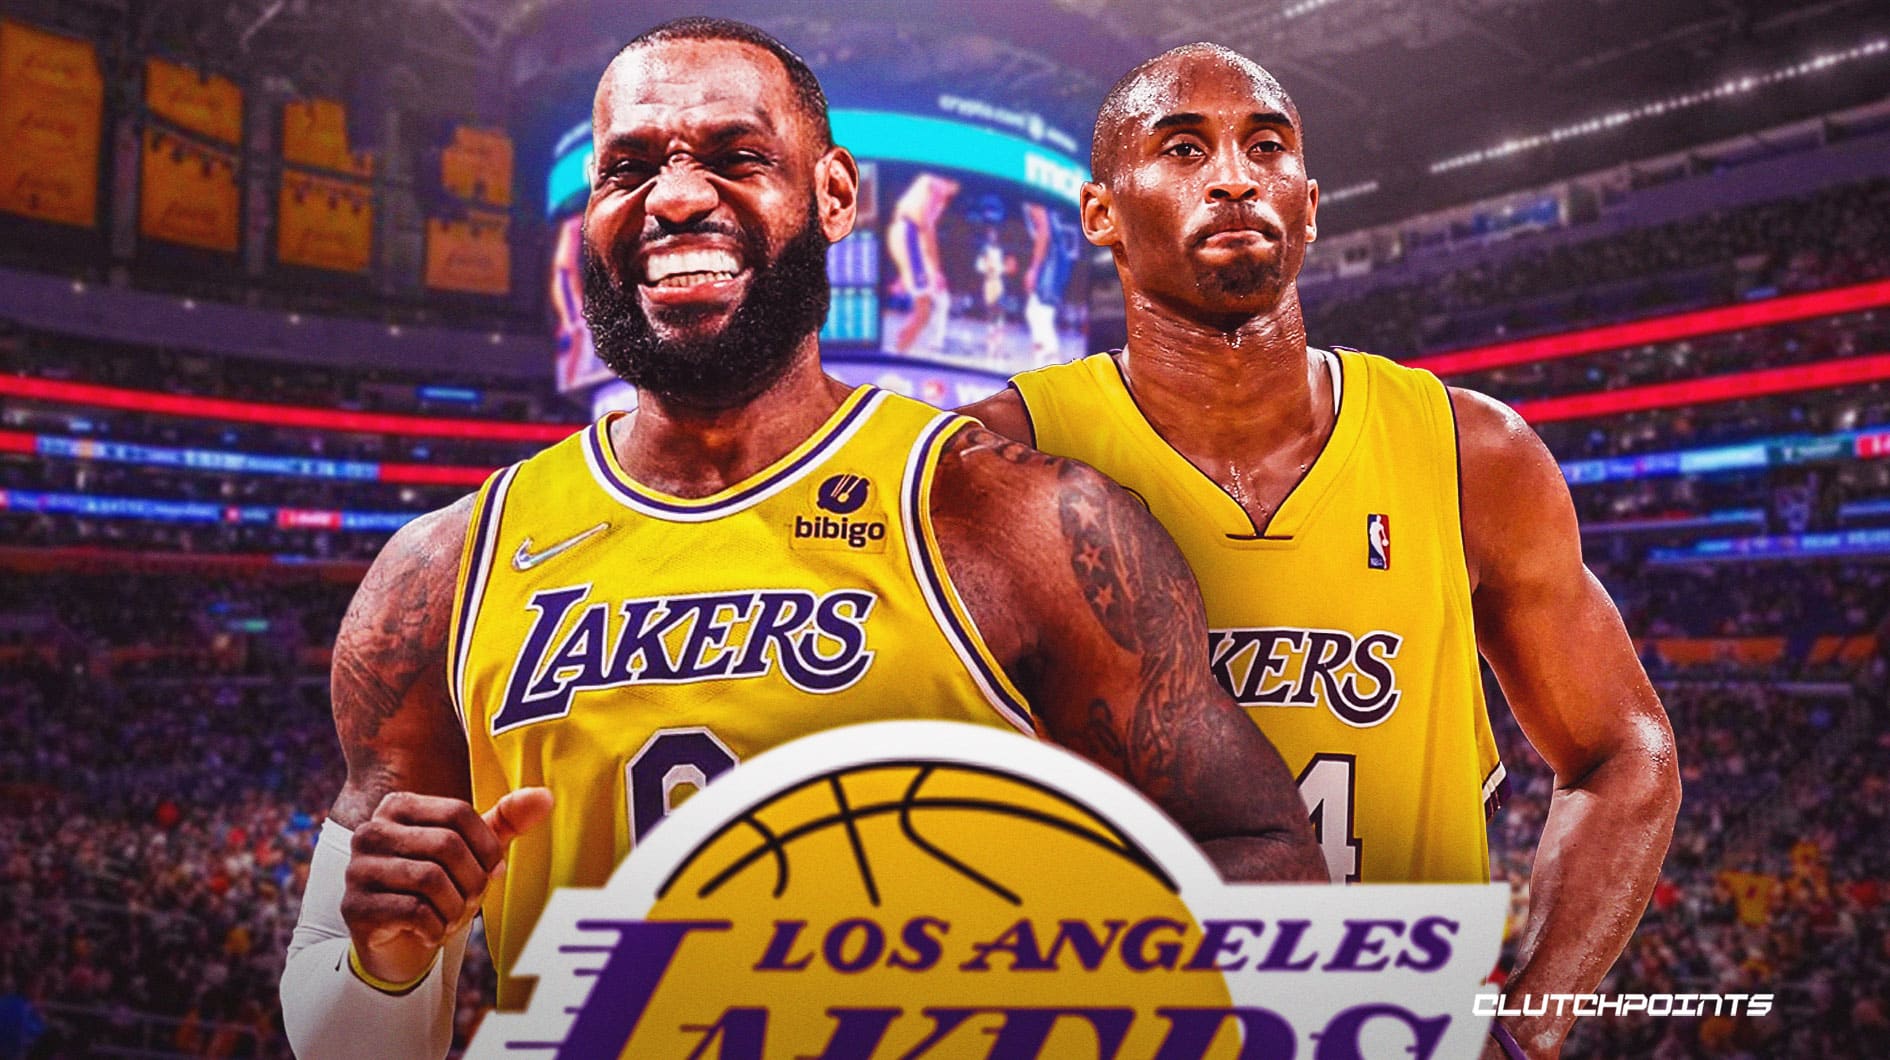 LeBron James of the Los Angeles Lakers and NBA legend, Kobe Bryant